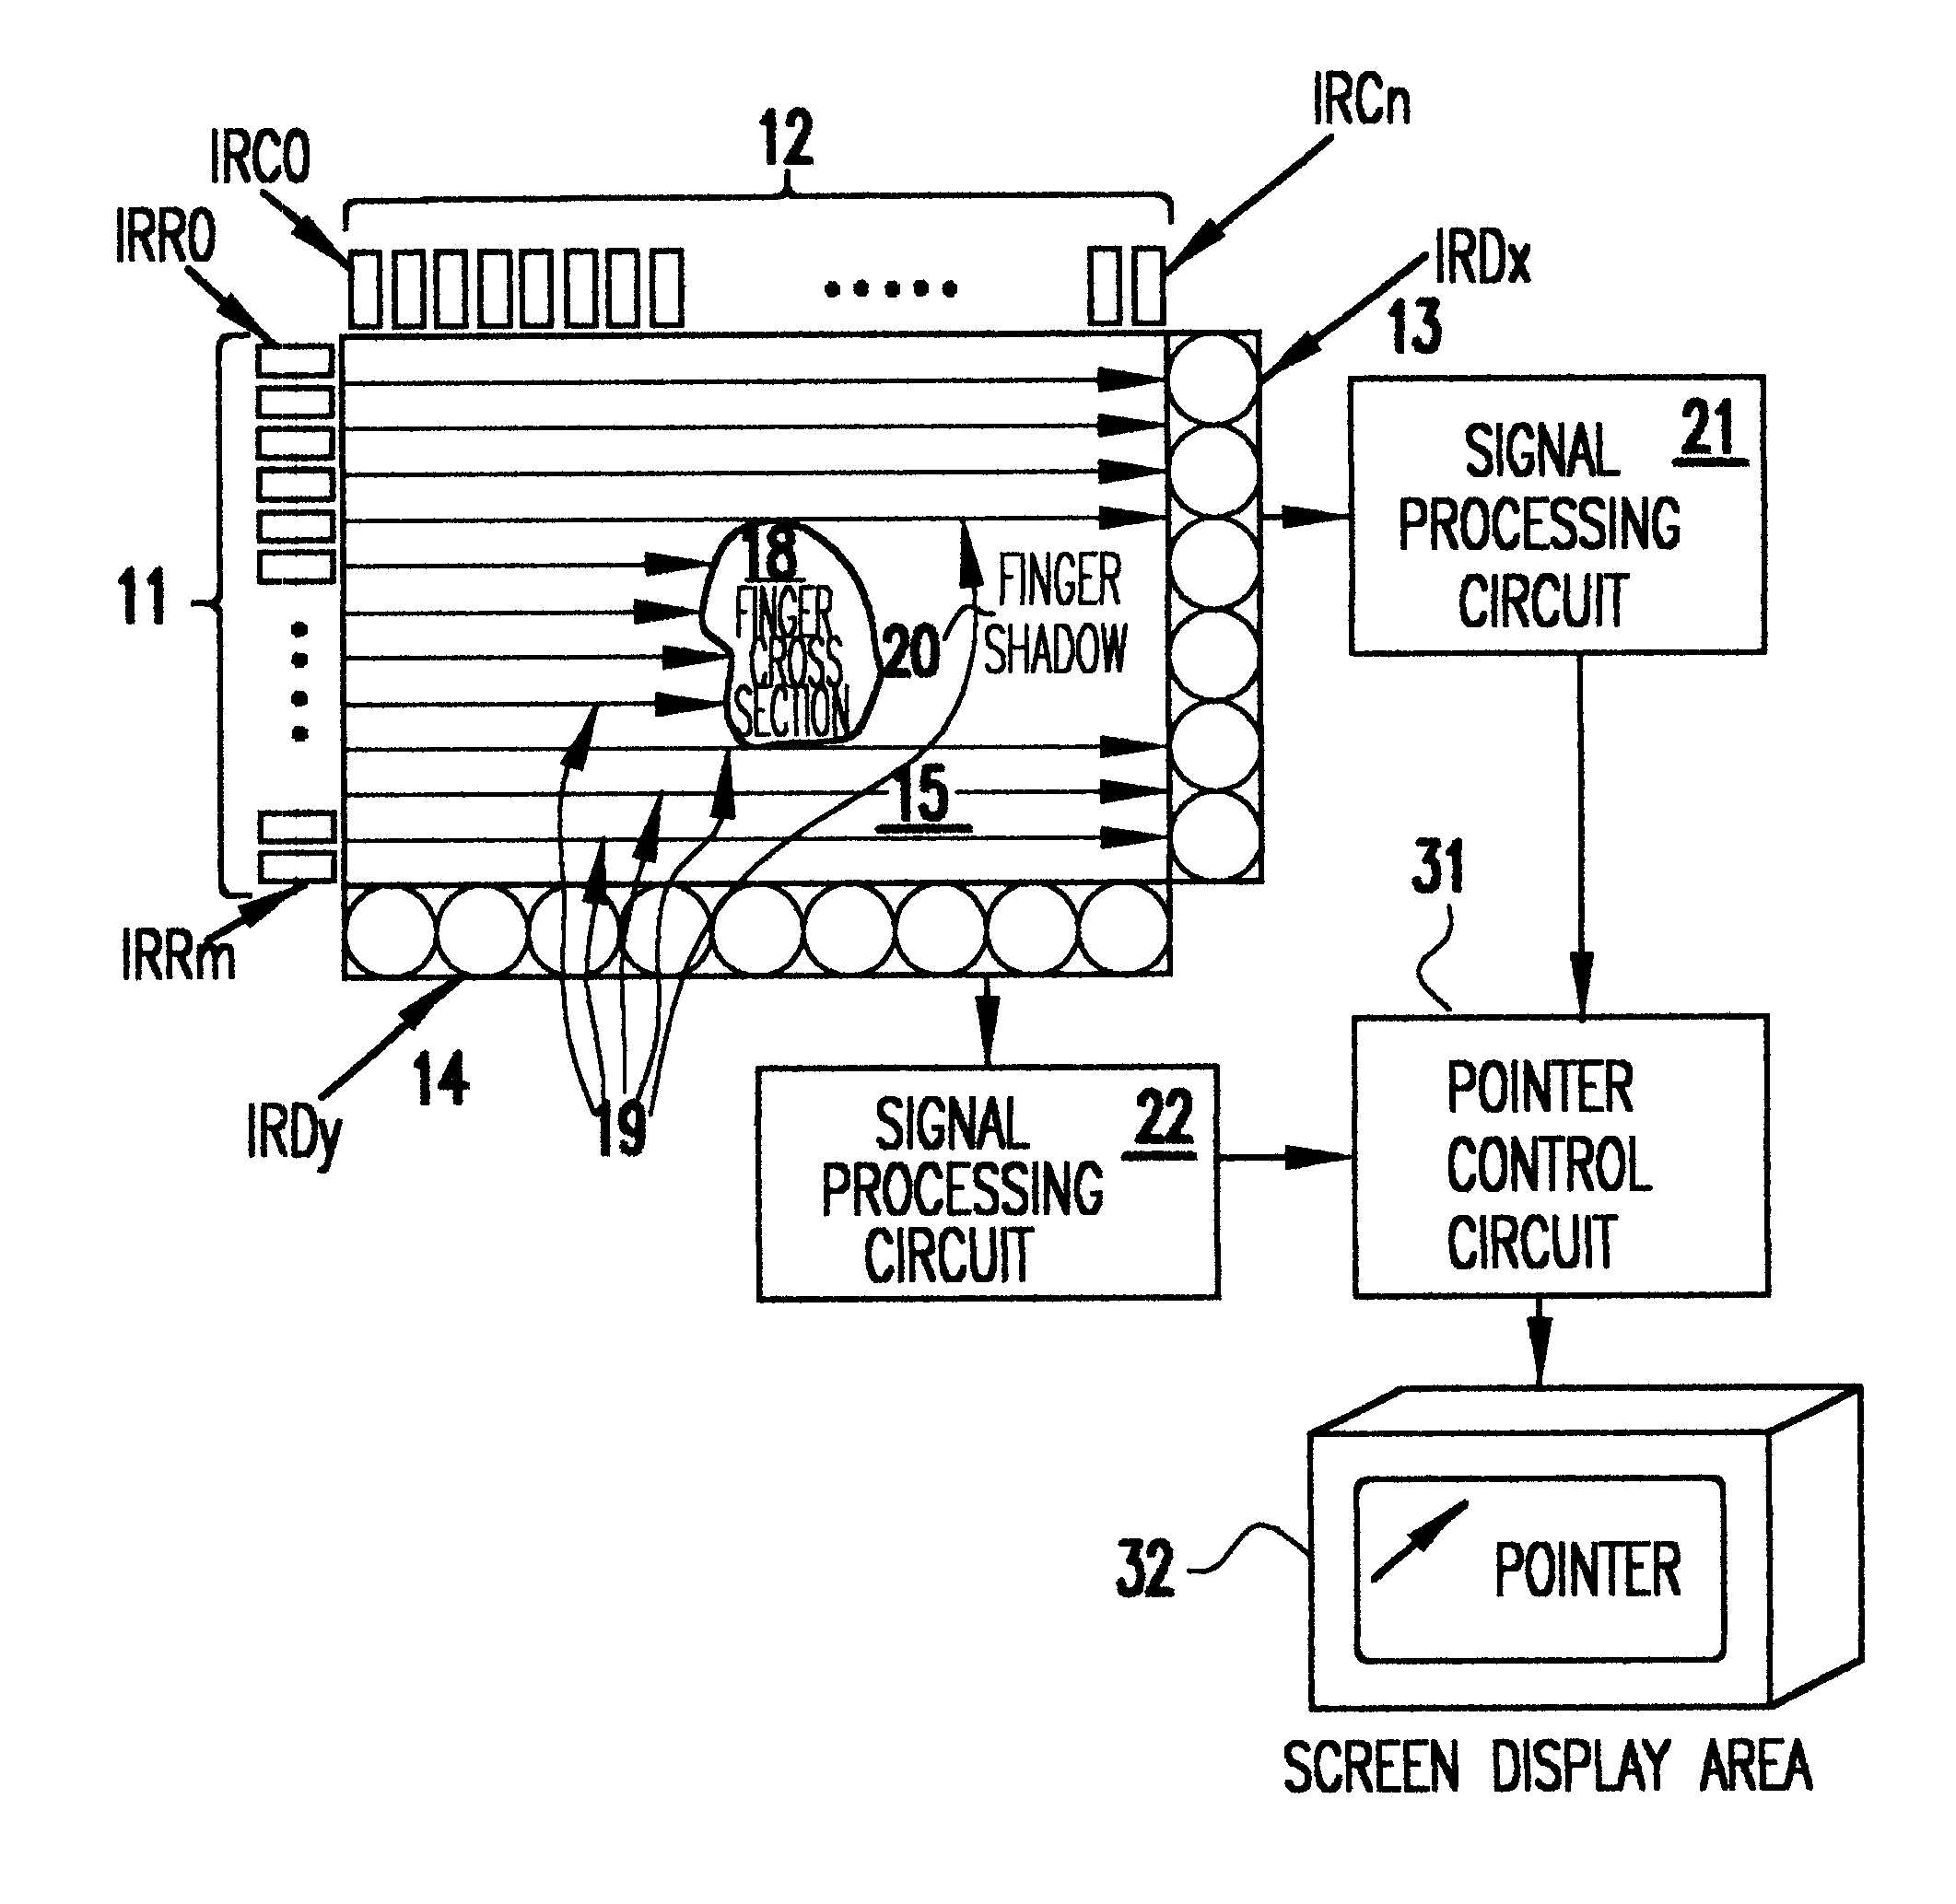 Method and apparatus for mouse positioning device based on infrared light sources and detectors